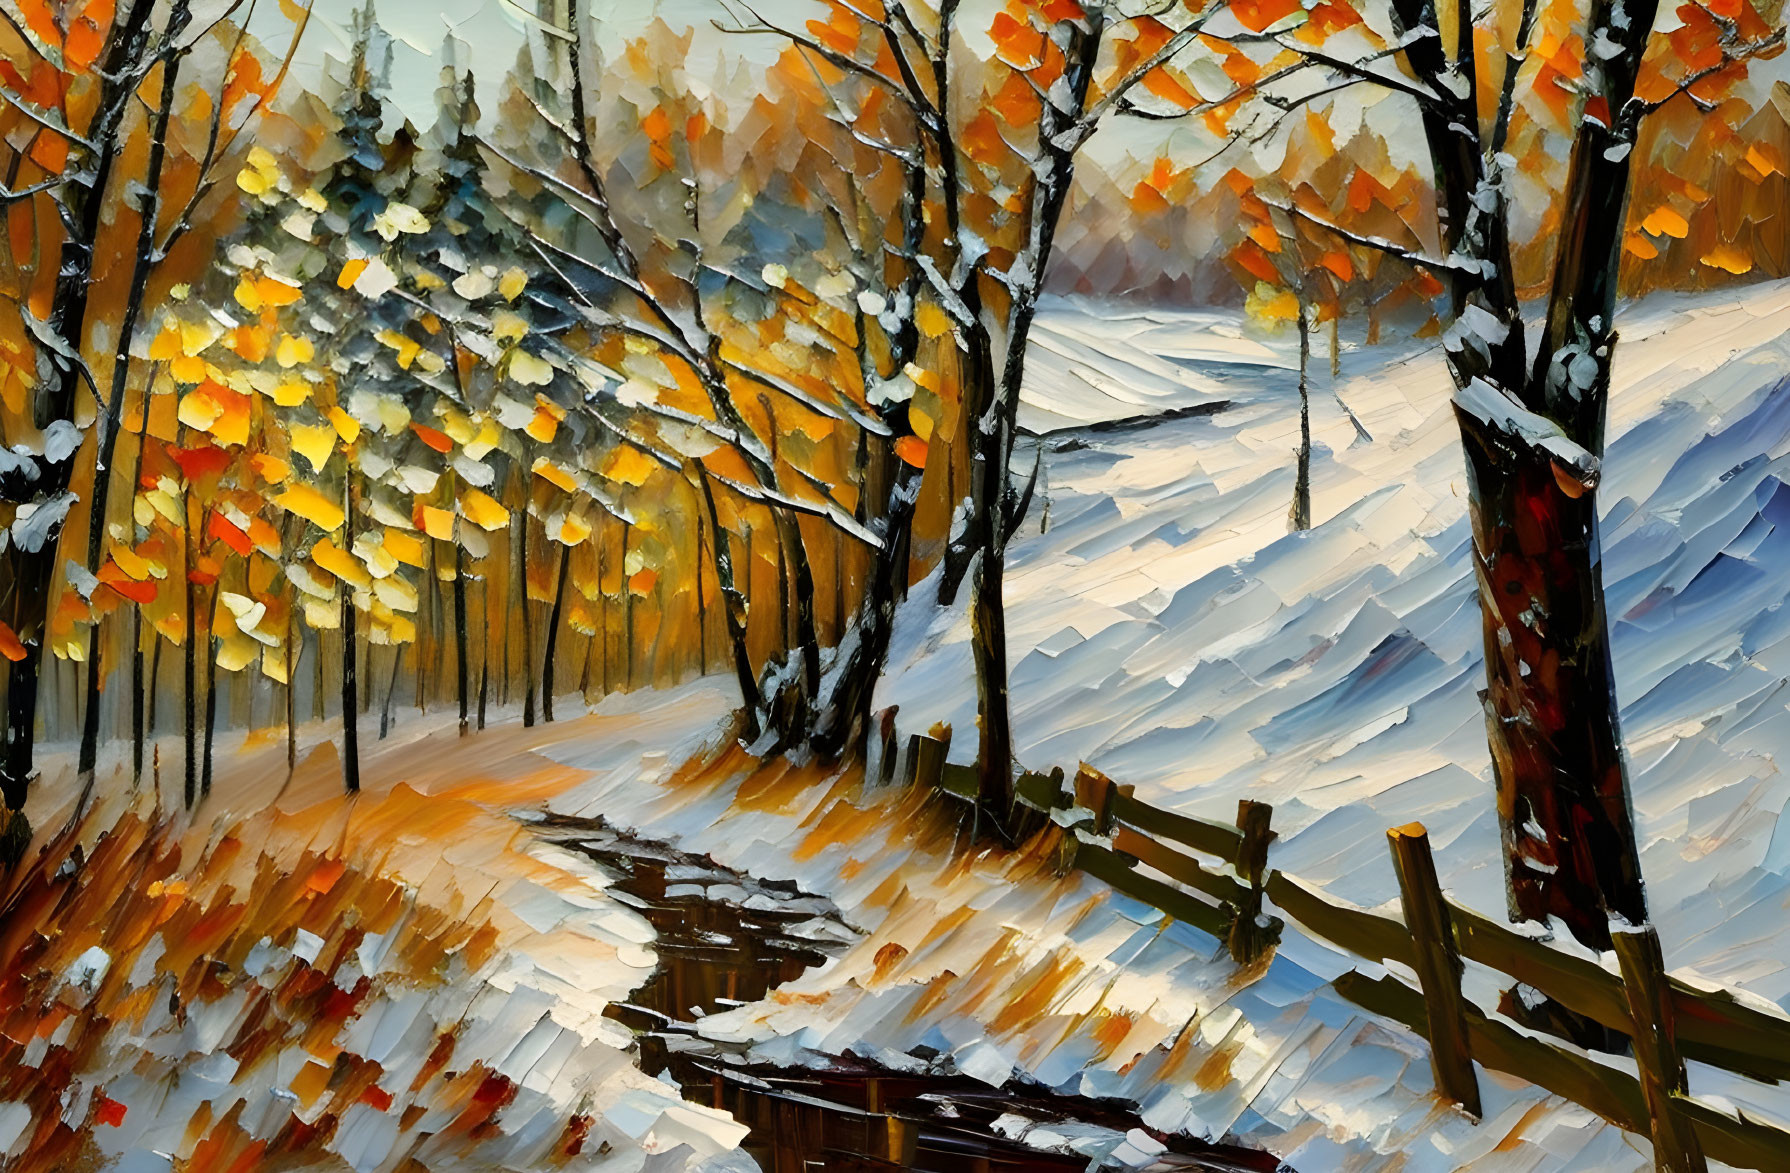 Snowy Path Painting with Wooden Fence and Autumn Trees